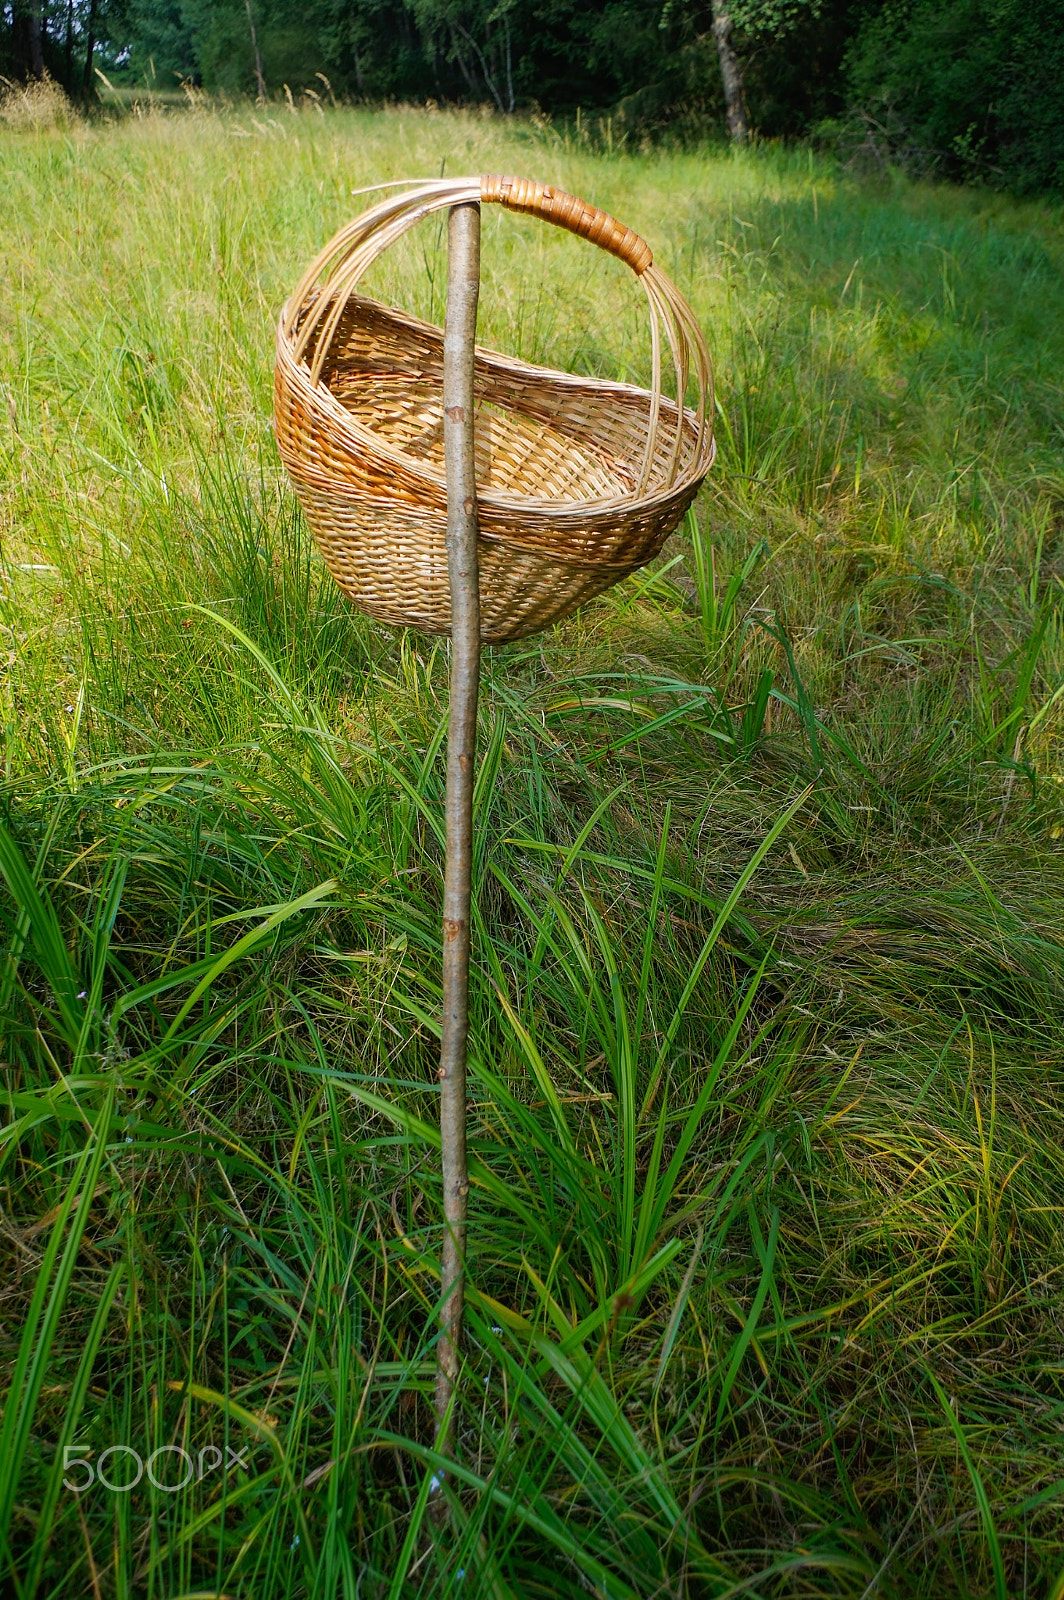 Pentax K-3 sample photo. Closeup picnic basket hanging on a rod in grass, outside with green nature background photography